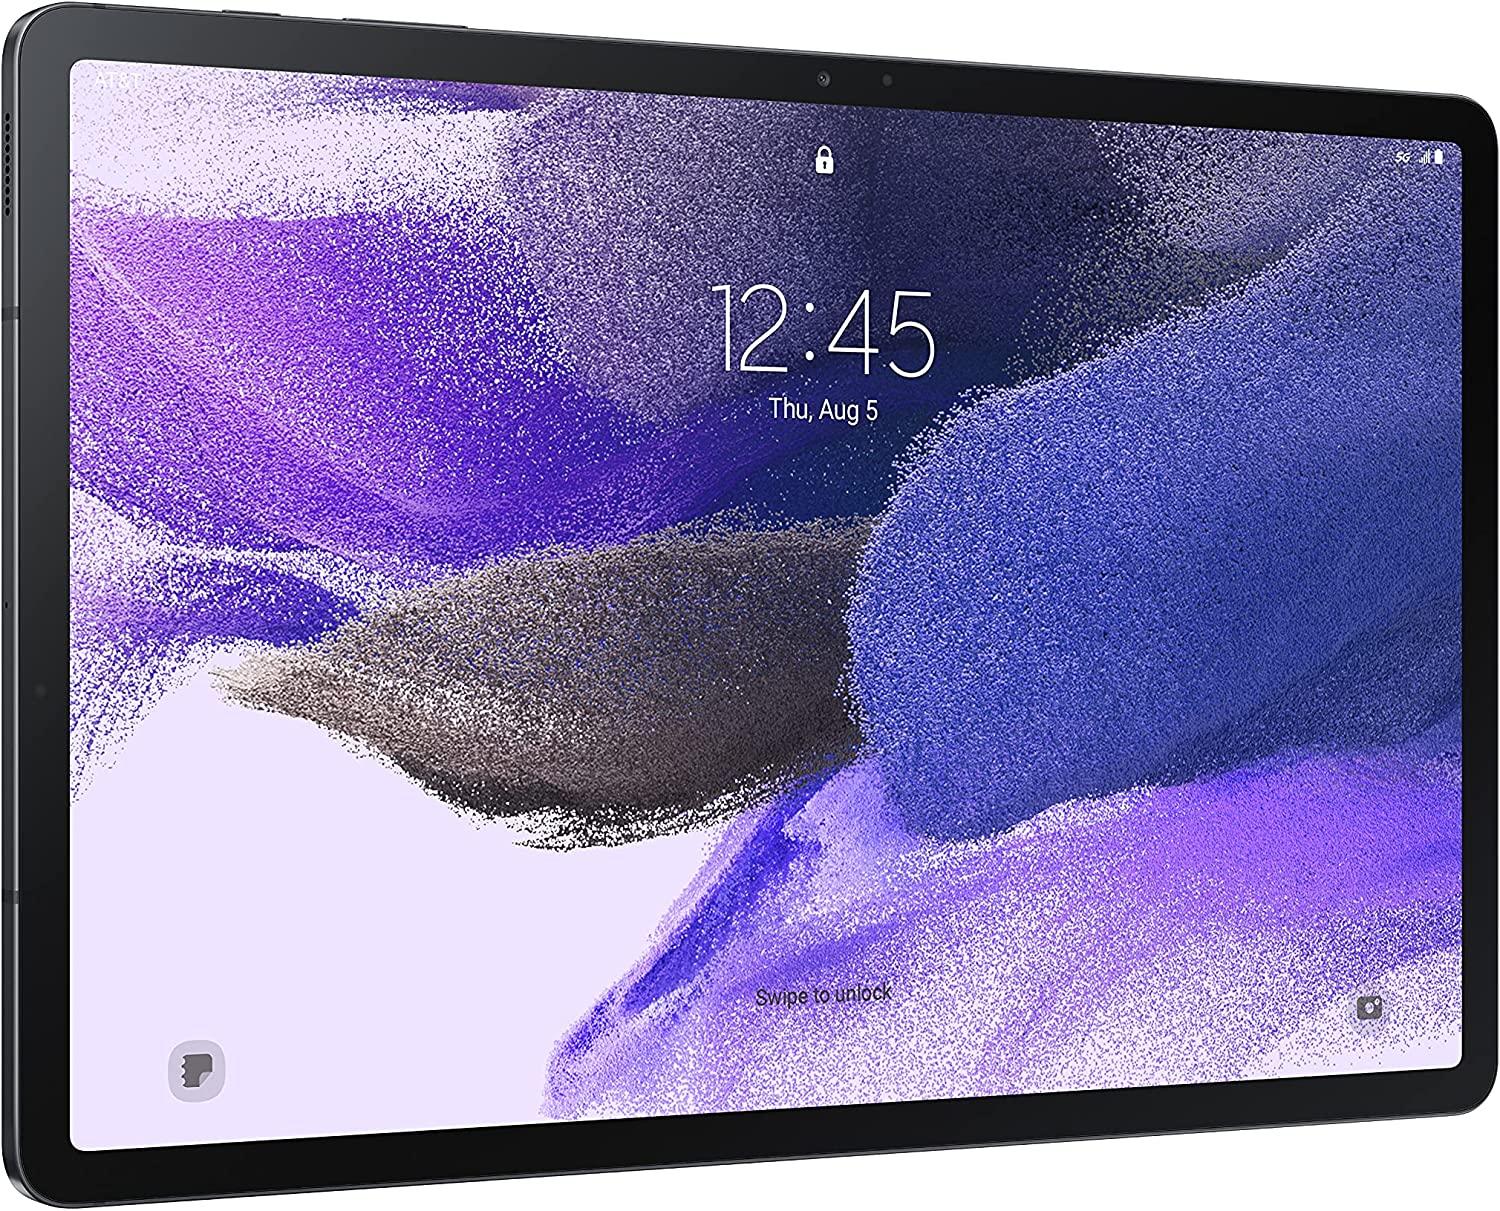 Samsung 12.4in Galaxy Tab S7 FE Android Tablet for $389 Shipped